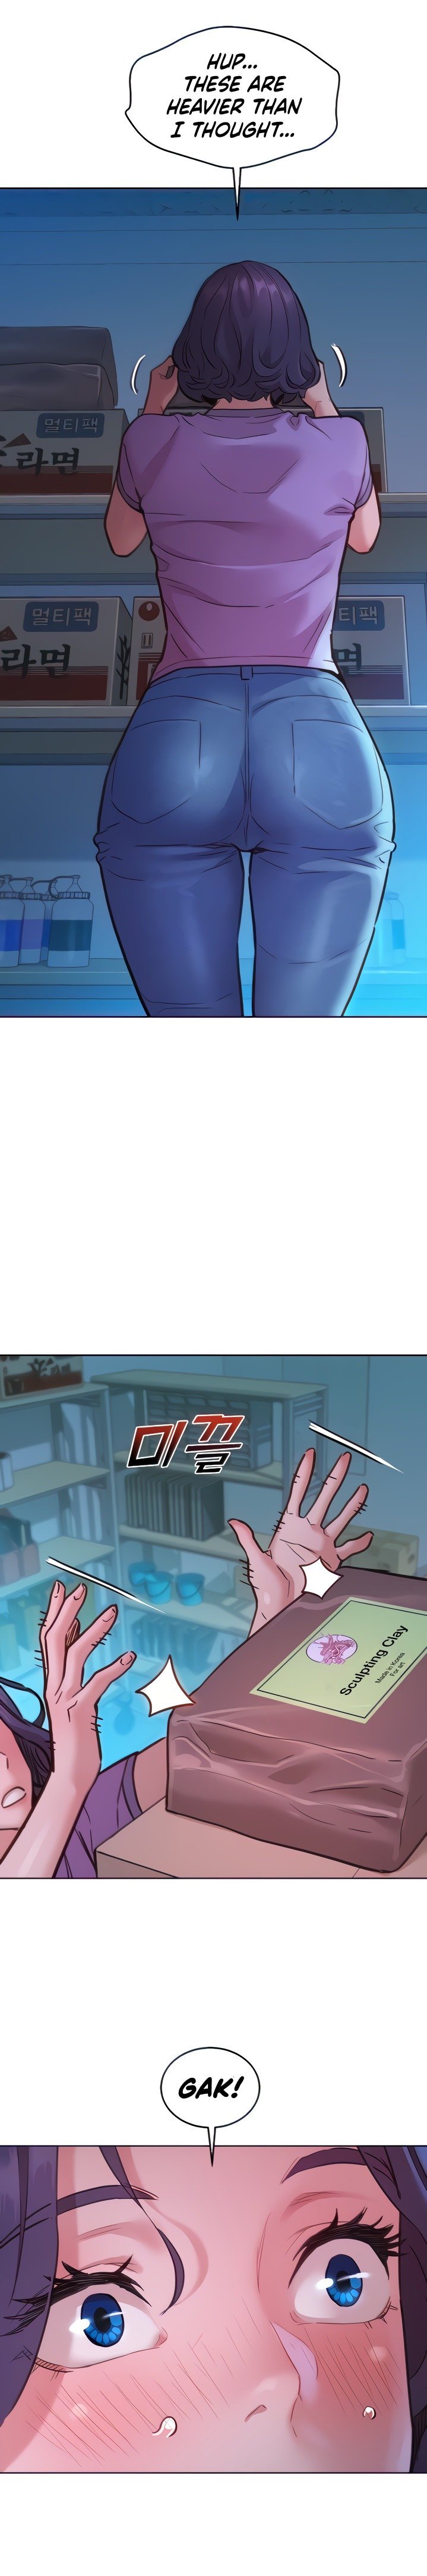 lets-hang-out-from-today-chap-31-6